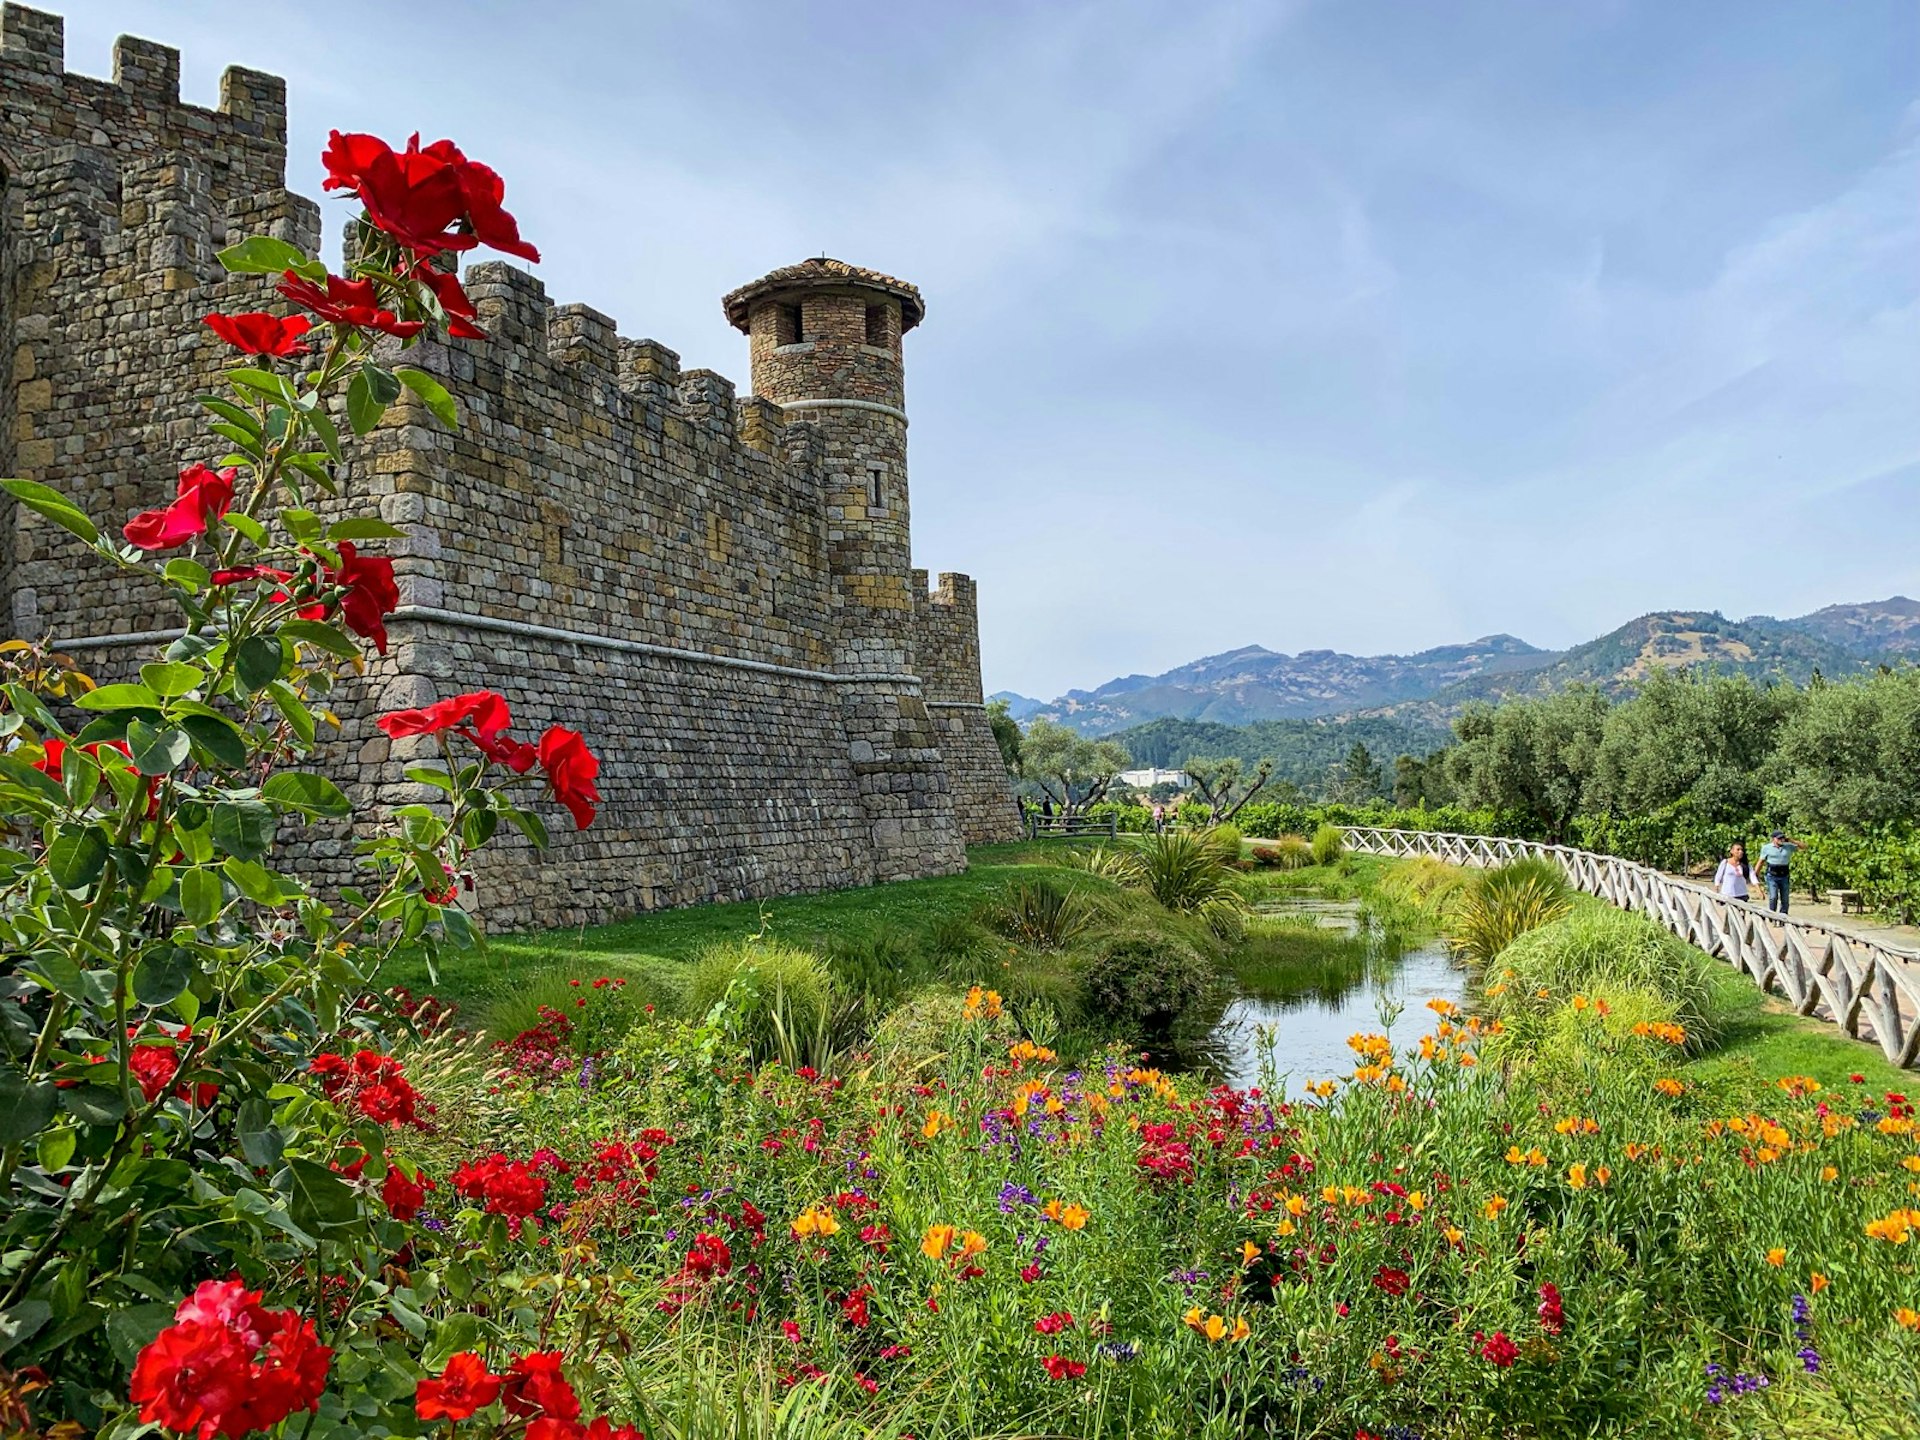 The walls of Castello di Amorosa next to a flower bush, with a blue sky overhead, perfect weather for a weekend in Napa